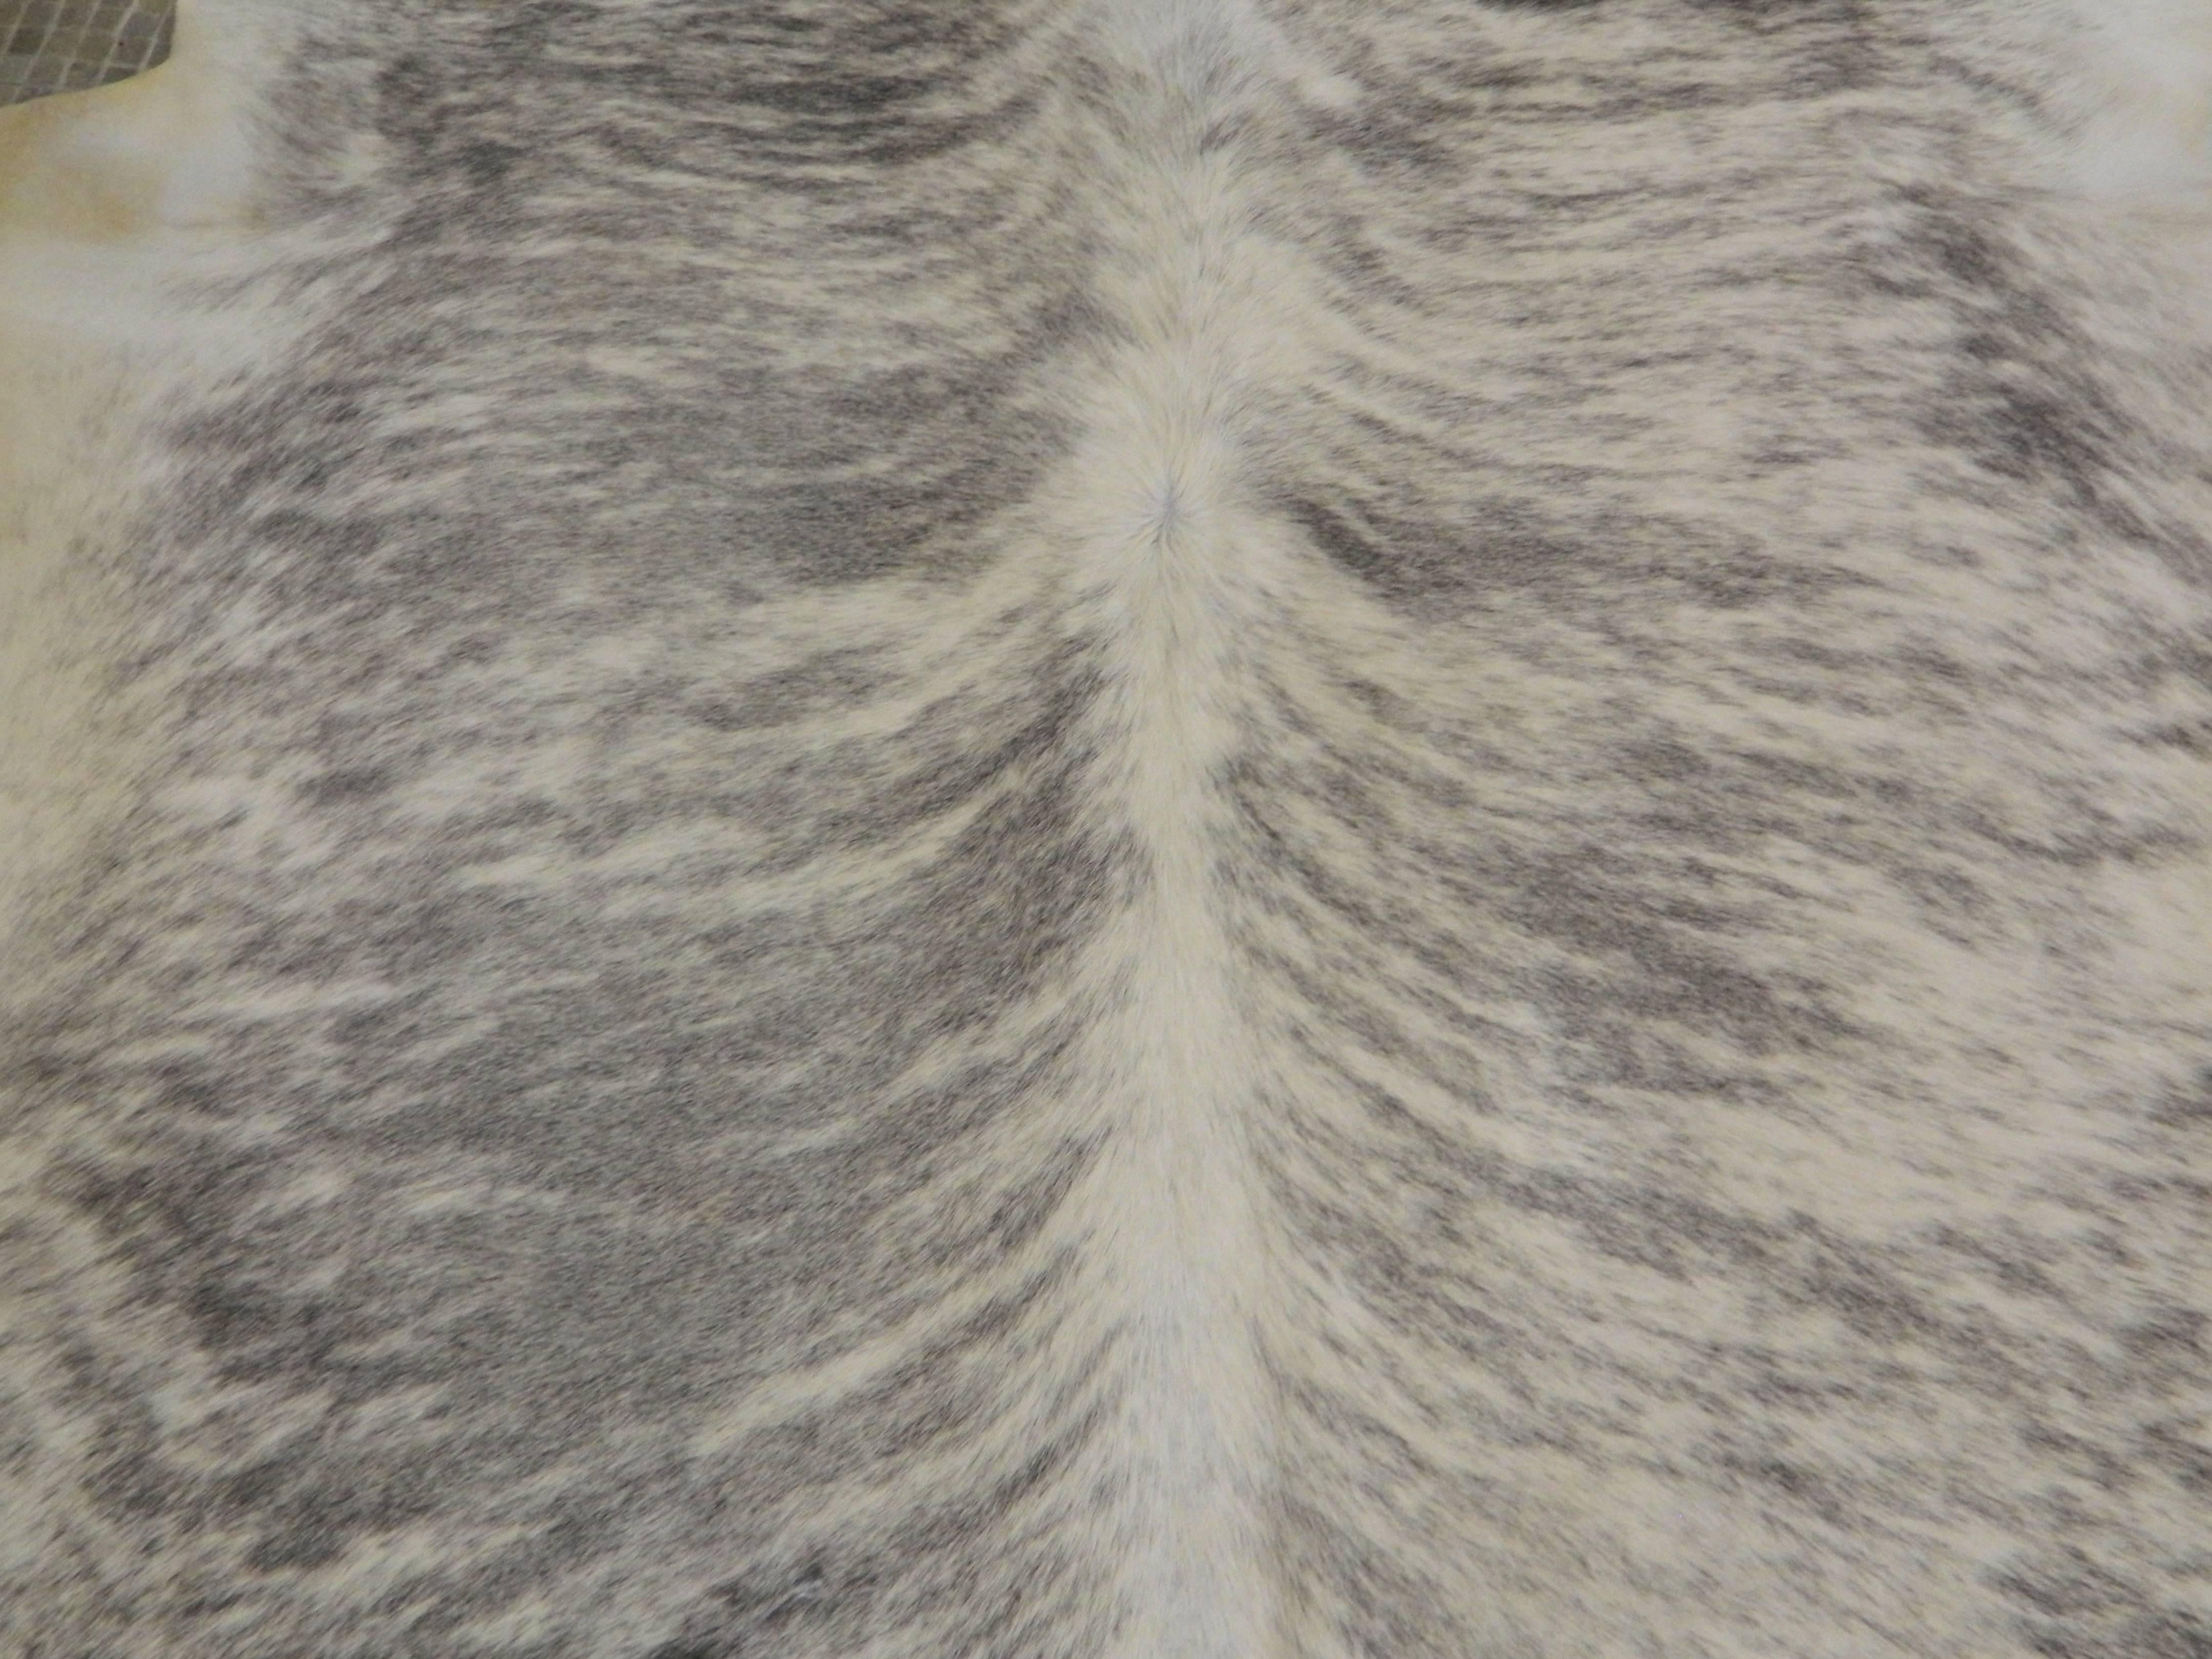 Top quality Brazilian Light Grey brindle cowhide 
Approximately 40 square feet
We also custom make pillows and rugs